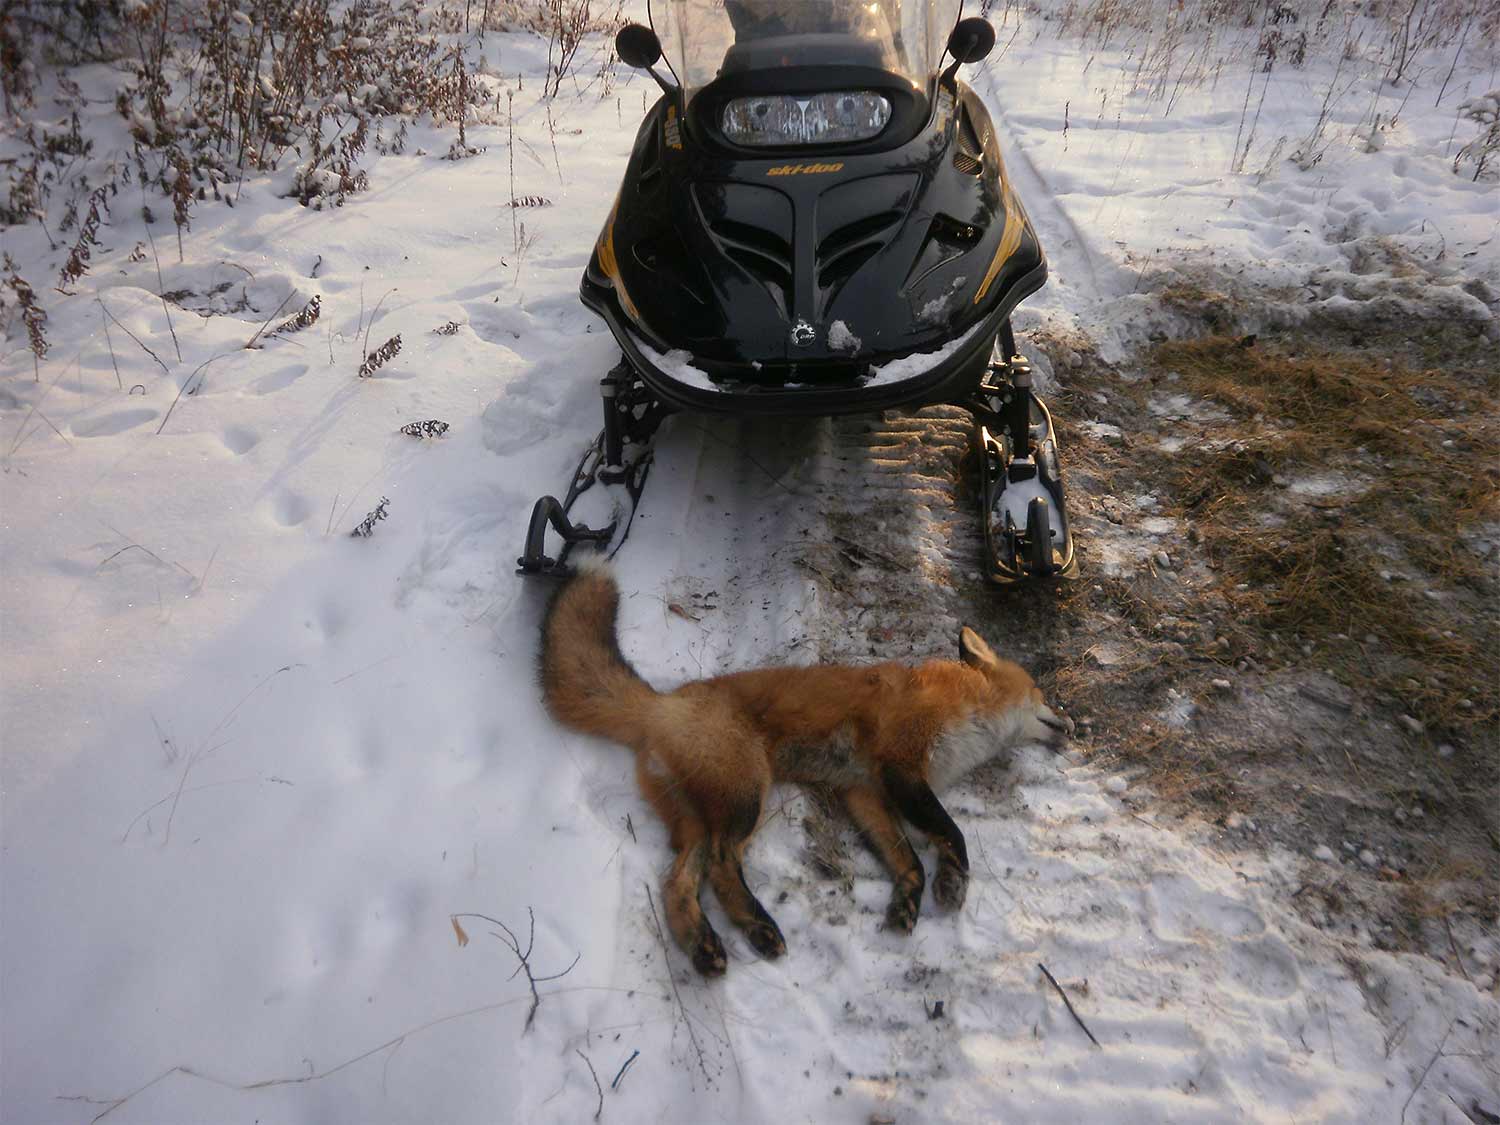 A fox on the ground in front of a snowmobile.